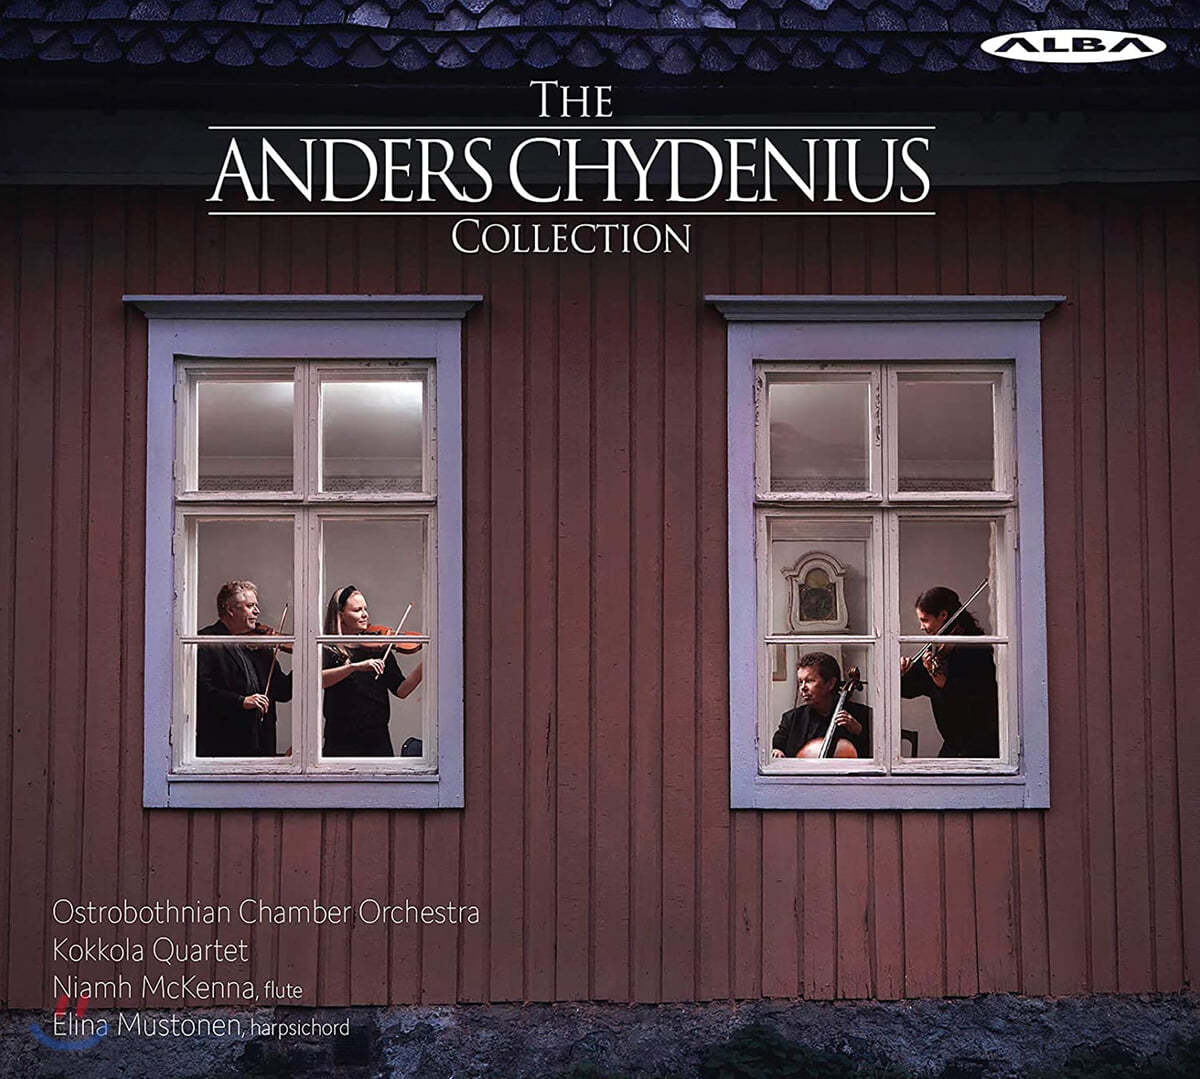 Niamh McKenna 안데르스 퀴데이우스 콜렉션 (The Anders Chydenius Collection) 